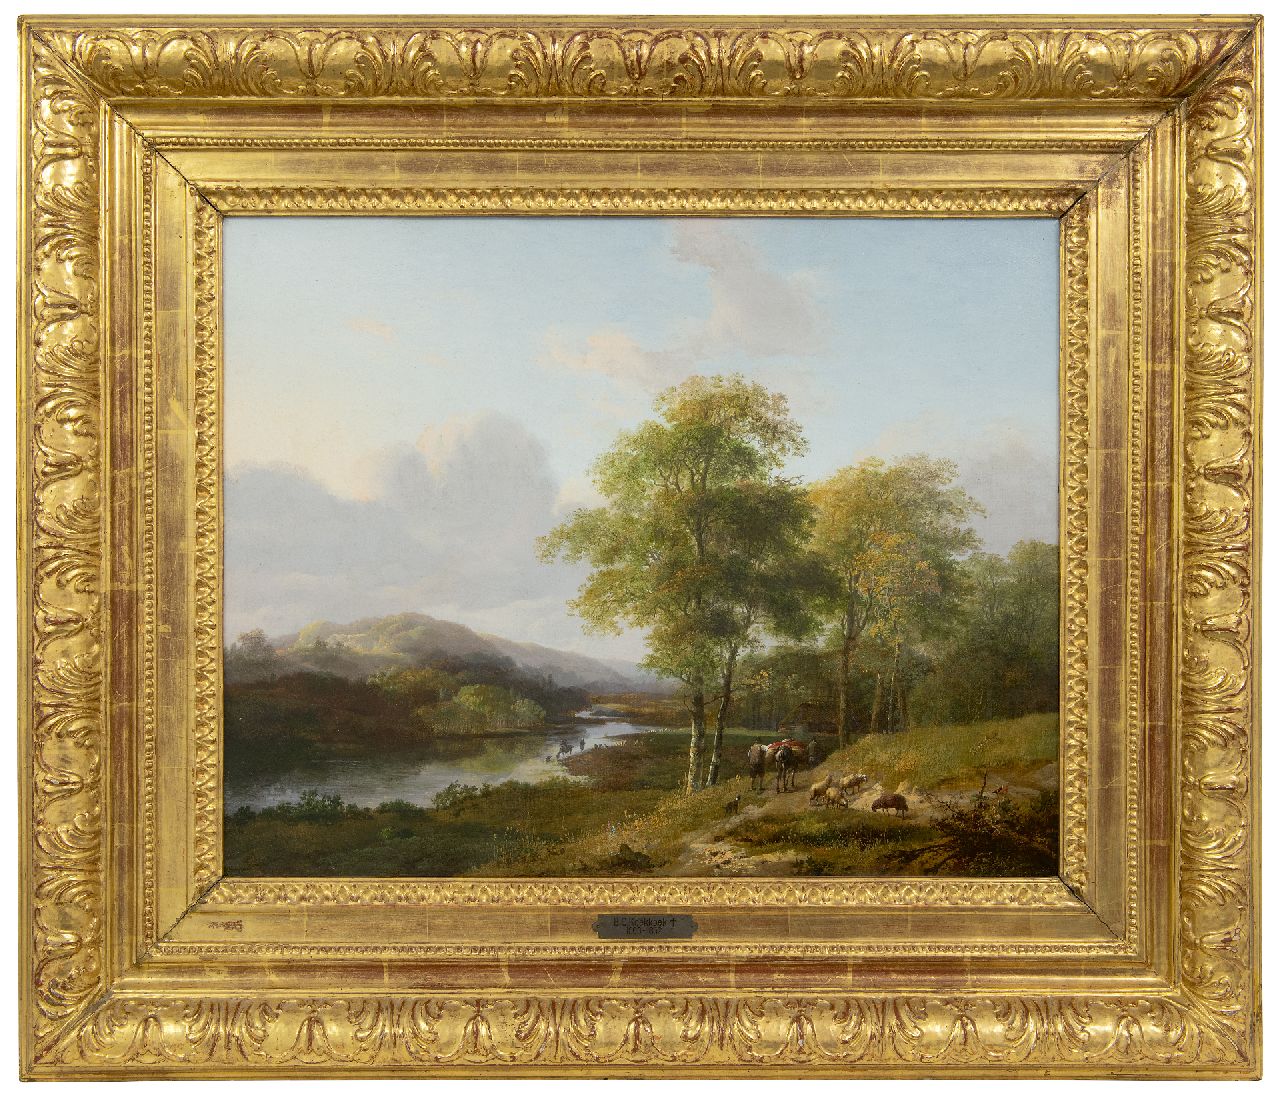 Koekkoek B.C.  | Barend Cornelis Koekkoek | Paintings offered for sale | River valley in summer, oil on canvas 46.5 x 58.5 cm, signed l.r. and painted ca. 1828